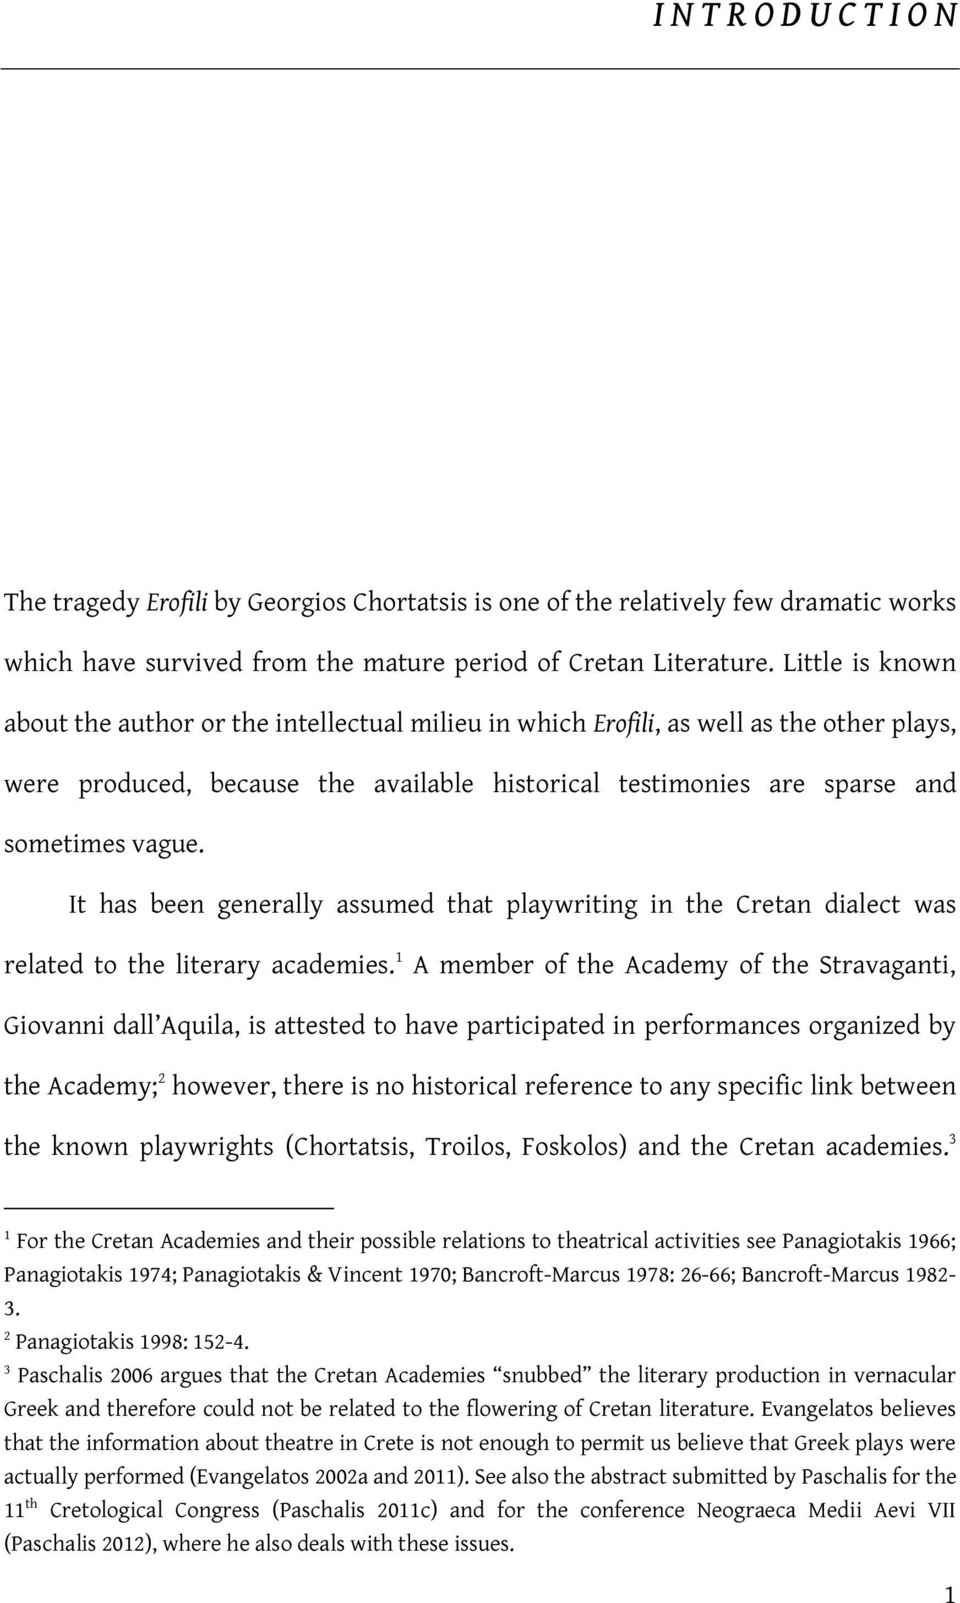 It has been generally assumed that playwriting in the Cretan dialect was related to the literary academies.